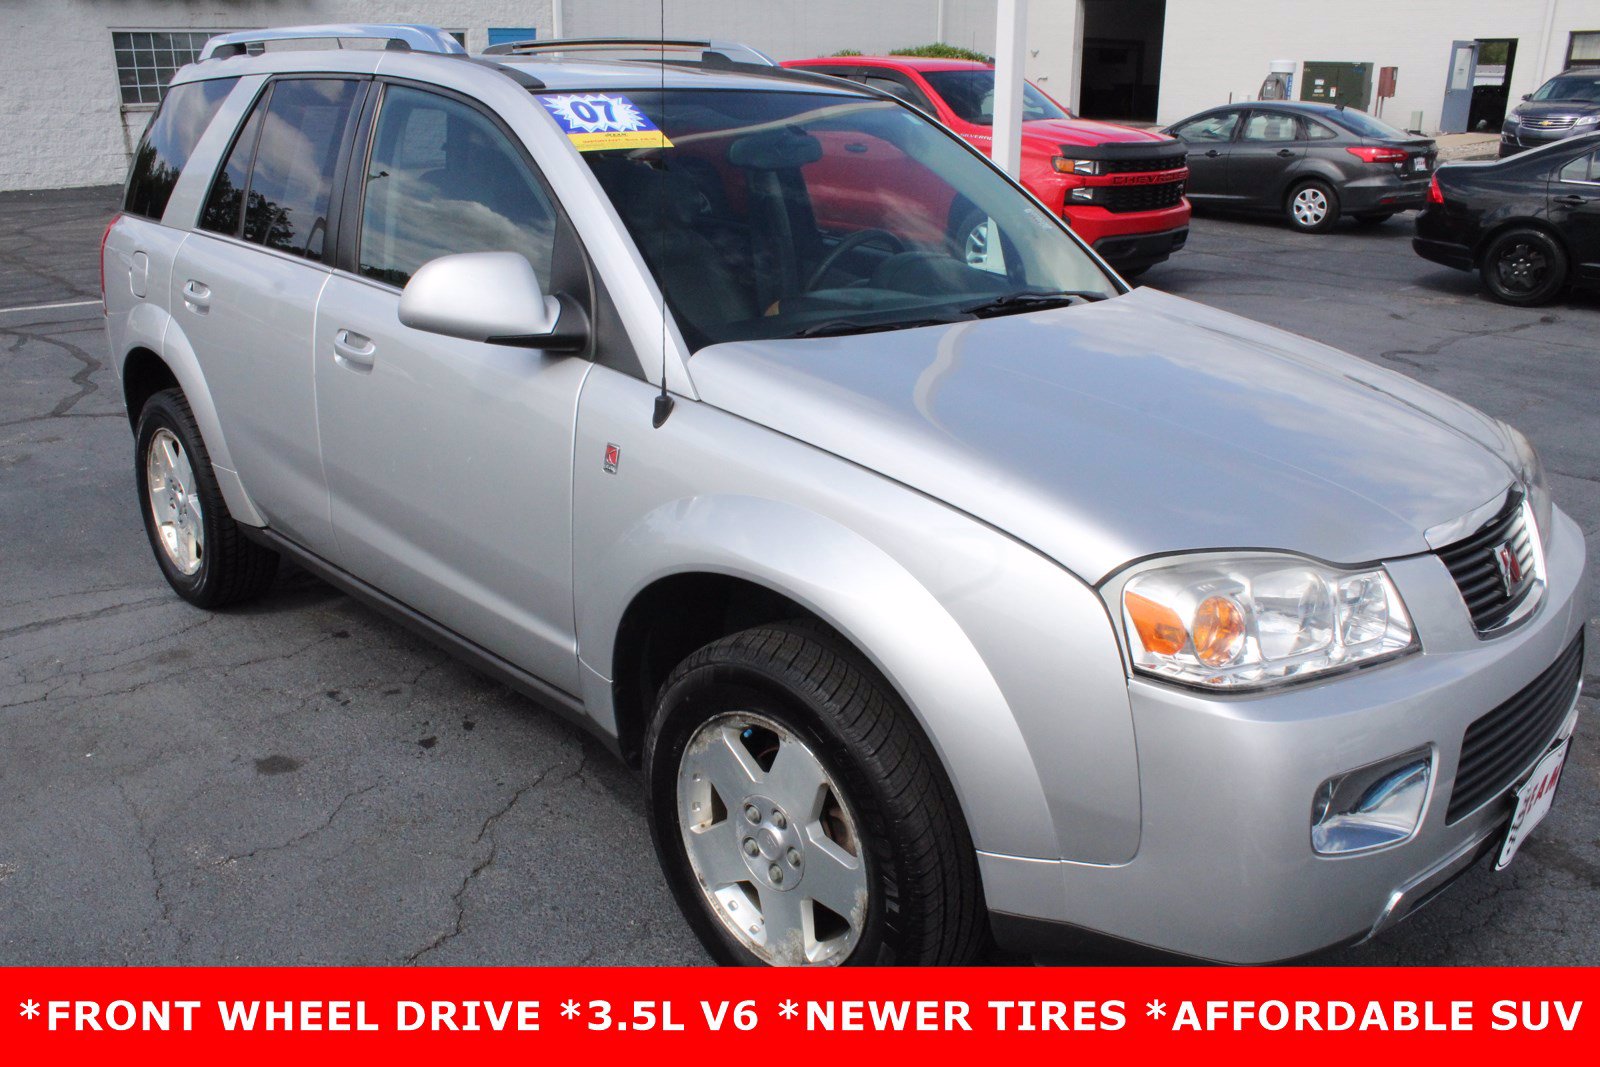 Pre-Owned 2006 Saturn VUE V6 Sport Utility in Merrillville #1721A | Team Auto Stores 2005 Saturn Vue Tire Size P235 60r17